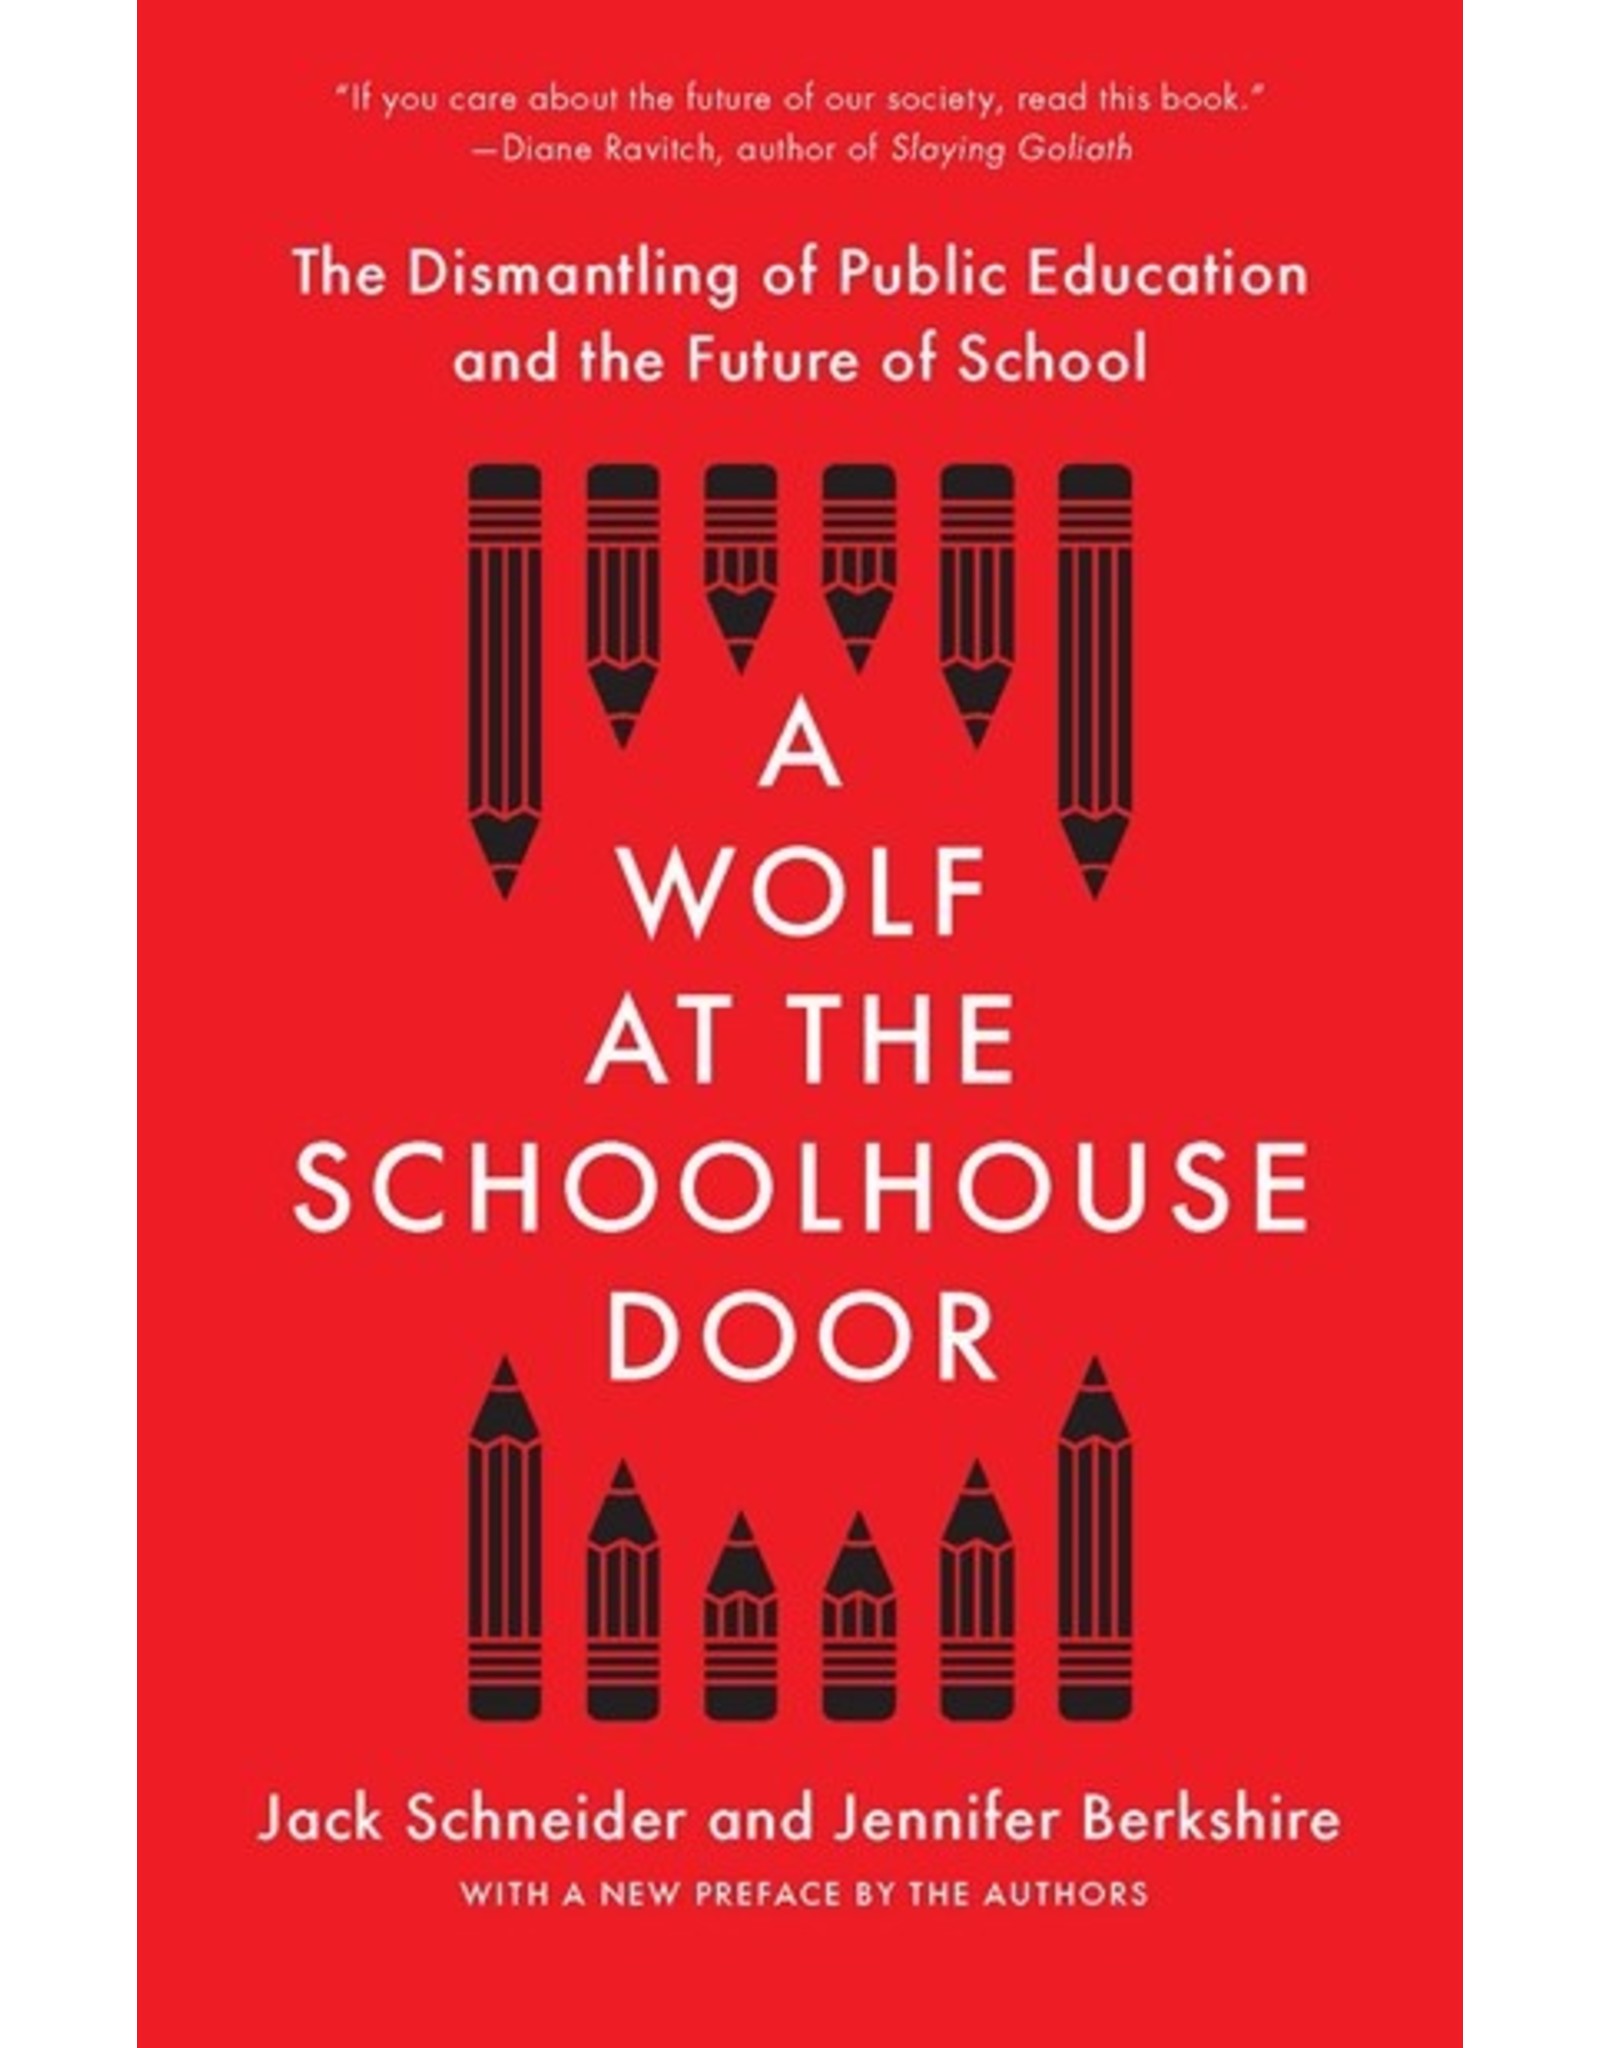 Books A Wolf at The Schoolhouse Door by Jack Schneider and Jennifer Berkshire